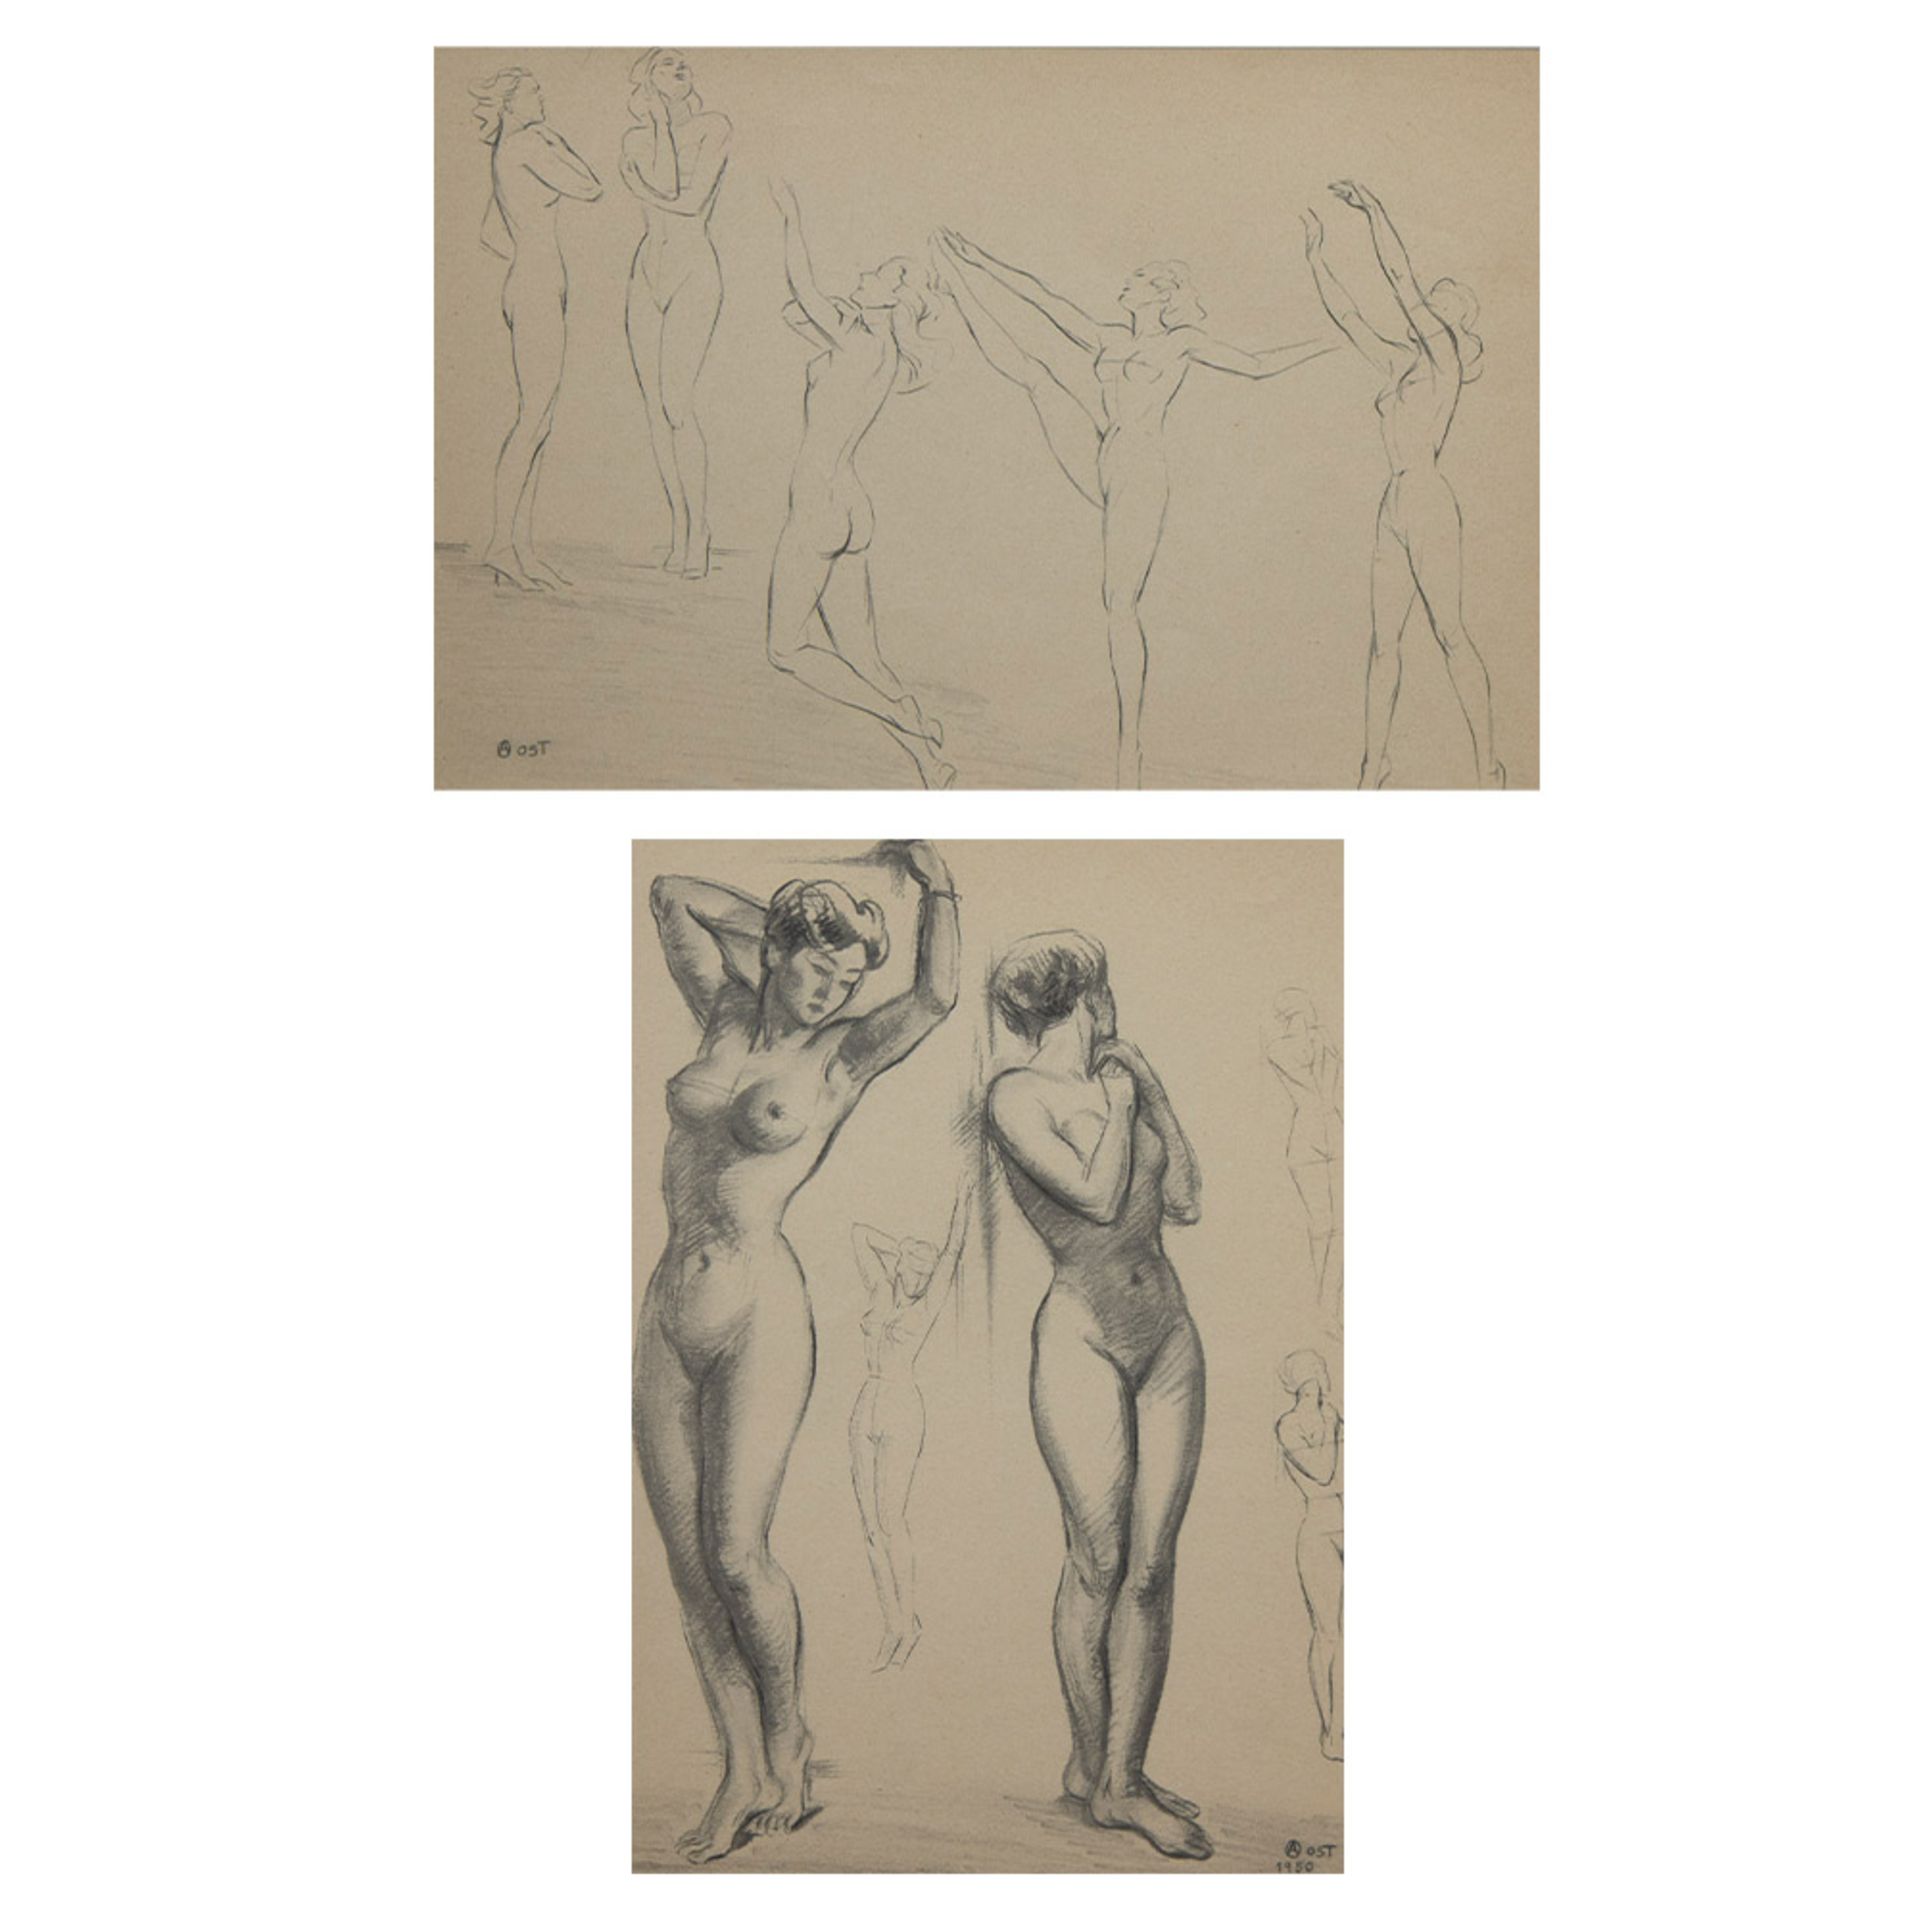 Alfred OST (1884-1945), 2 drawings, signed and one dated 1950